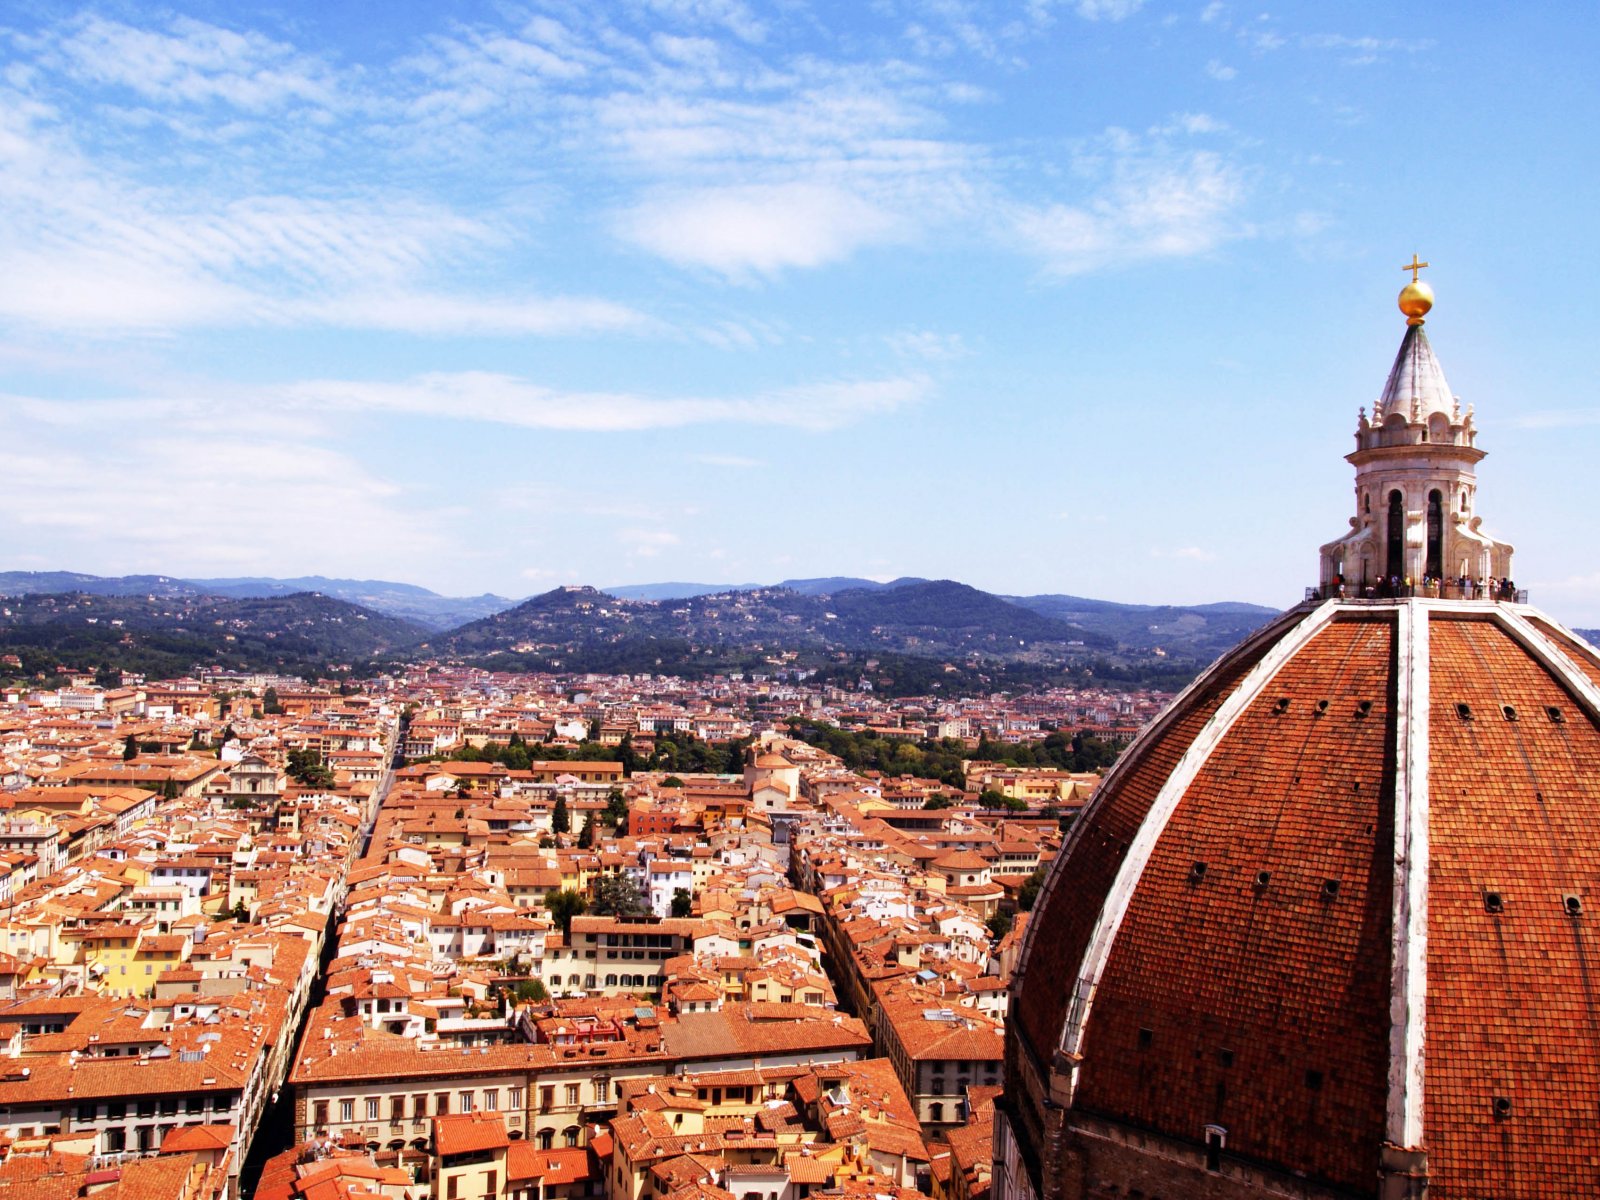 How to climb to the dome of the cathedral in Florence